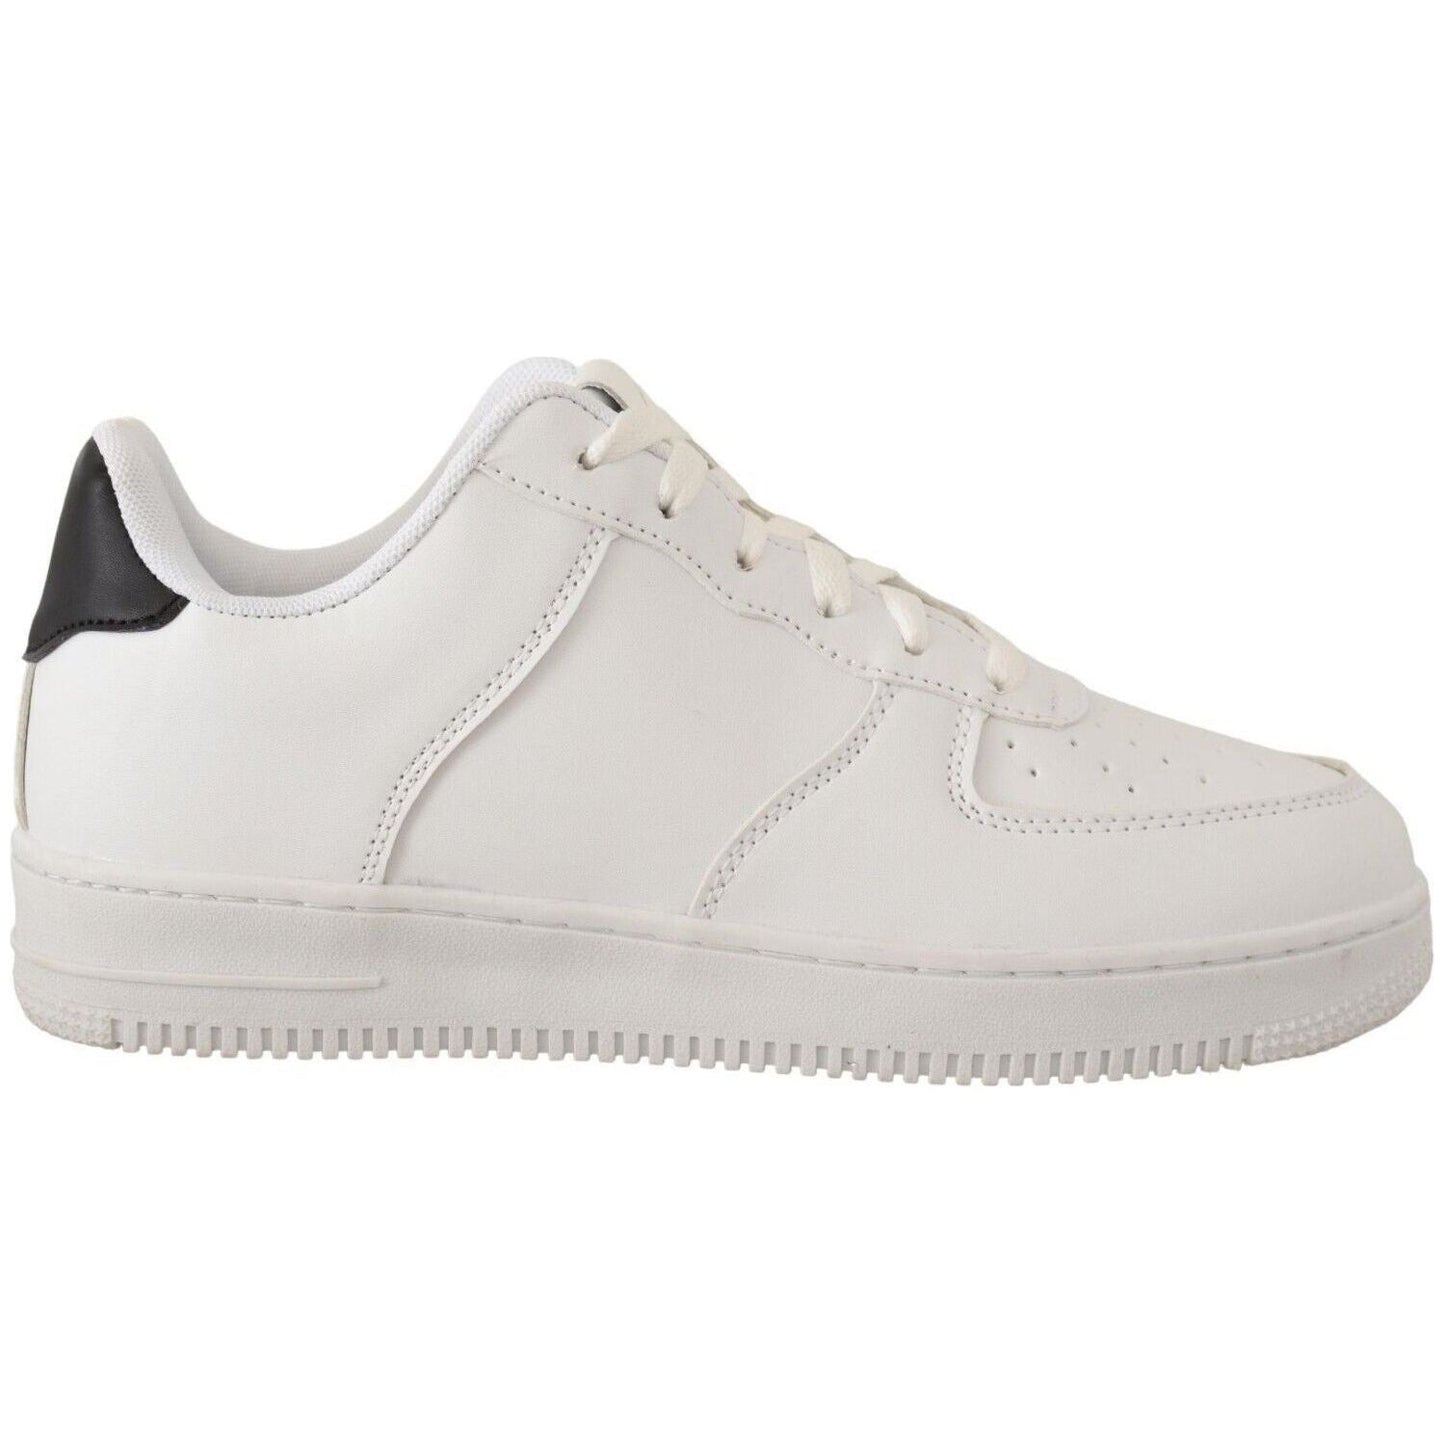 SIGNS Chic White Leather Low Top Sneakers MAN SNEAKERS white-leather-perforated-lace-up-sneakers-casual-men-shoes s-l1600-185-897401df-635.jpg